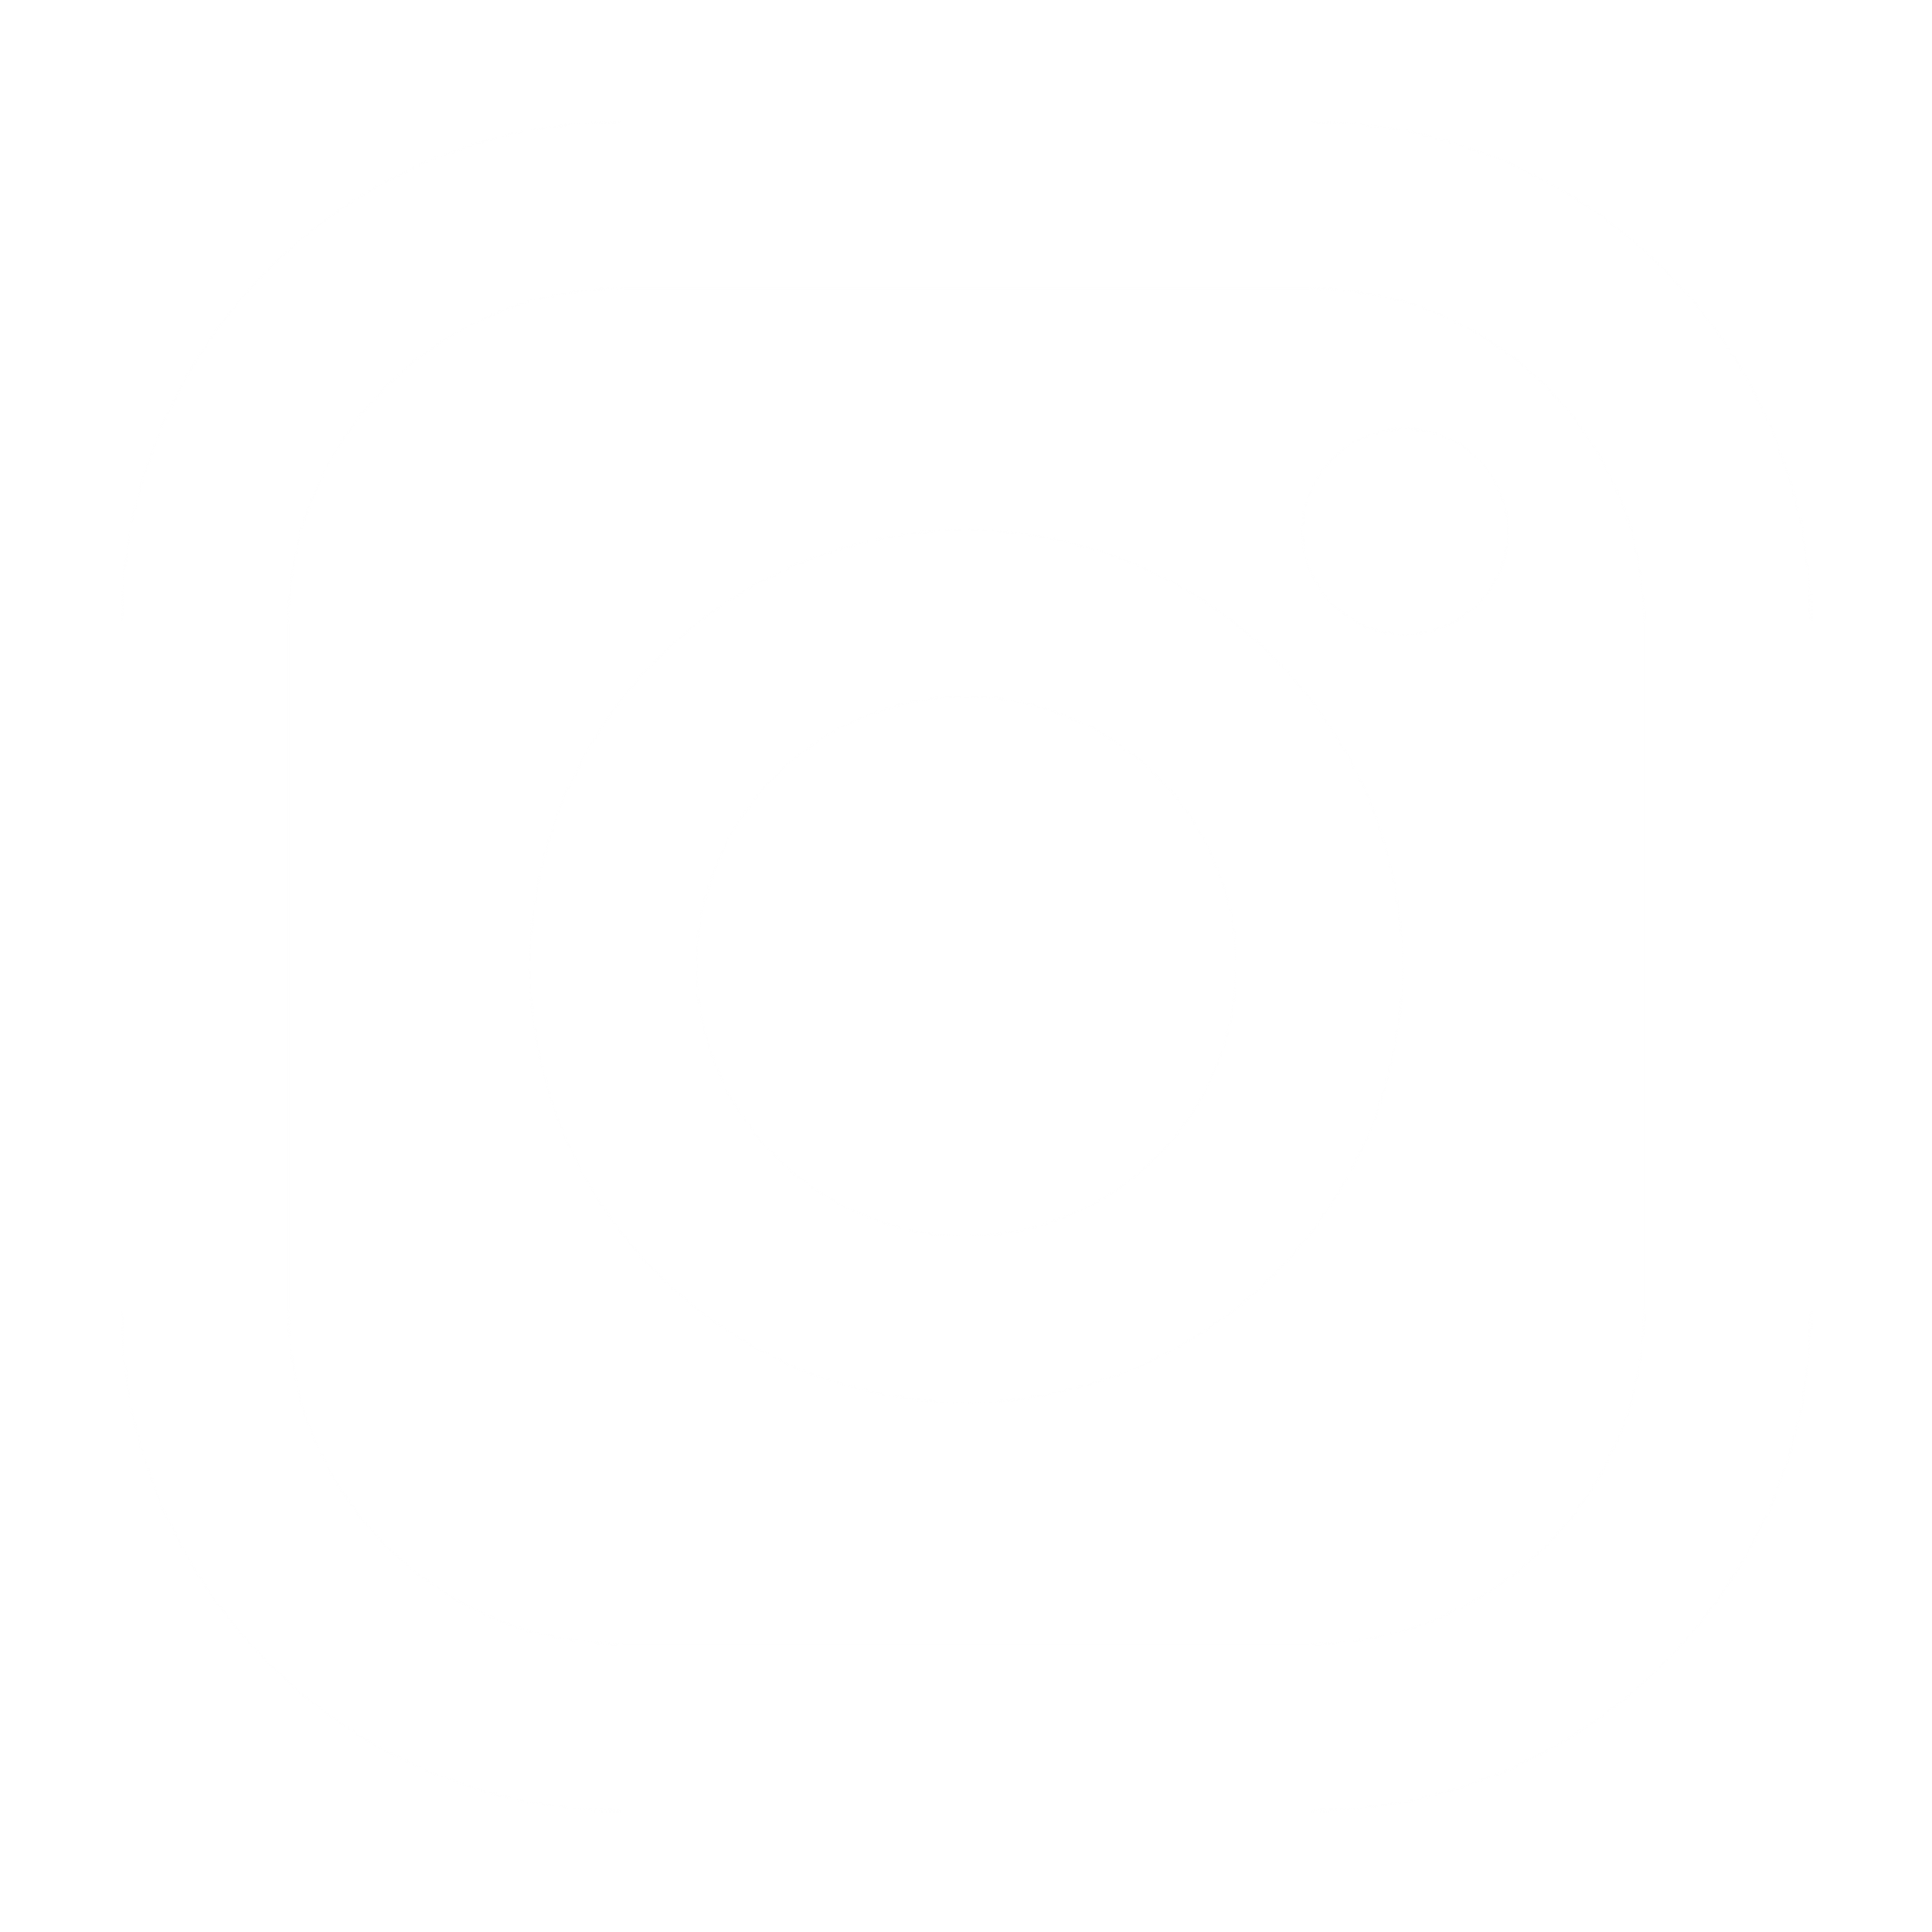  - white instagram icon png at getdrawings com free white instagram